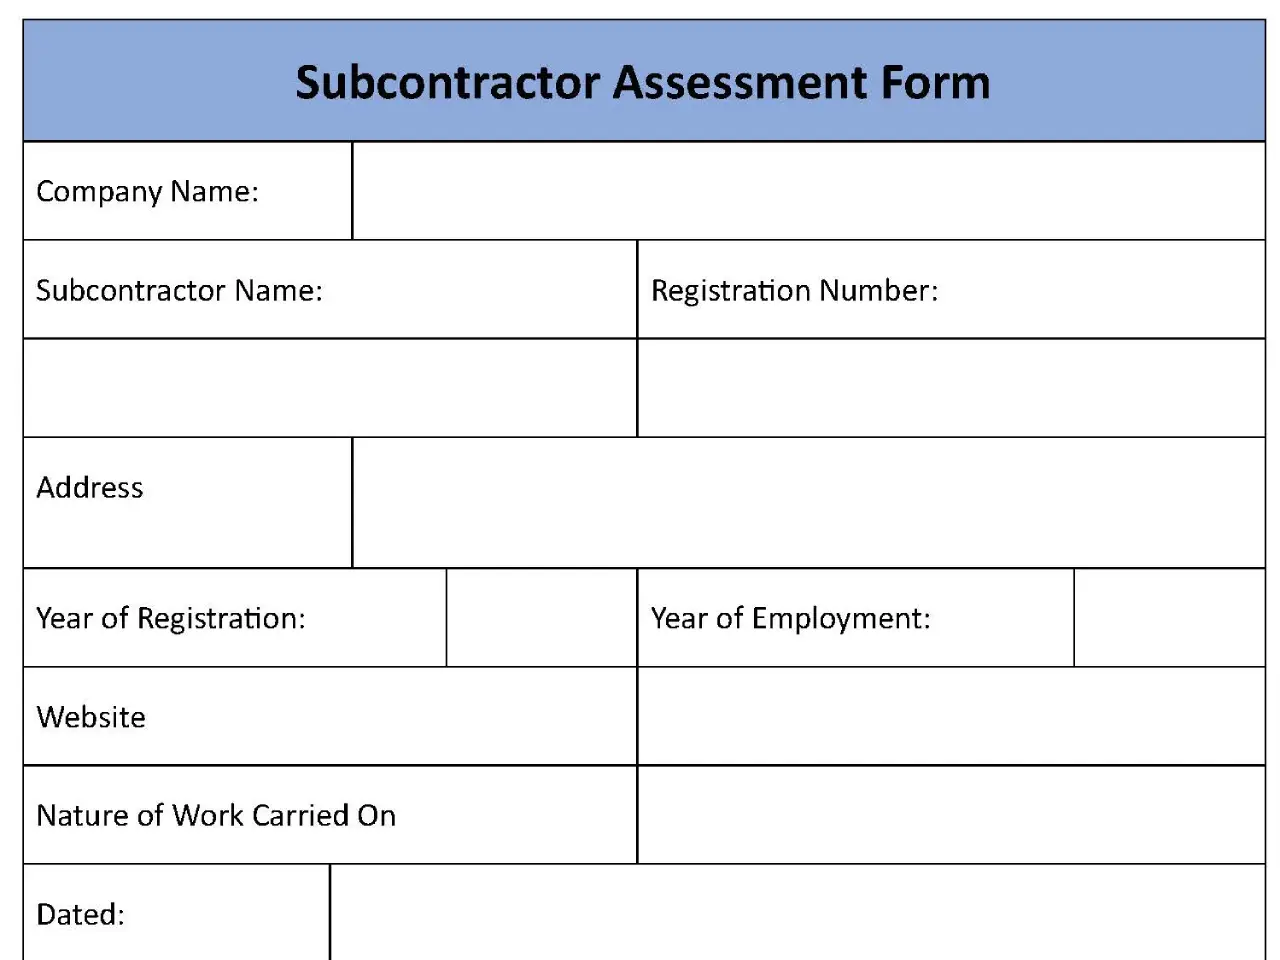 Sub Contractor Assessment Form